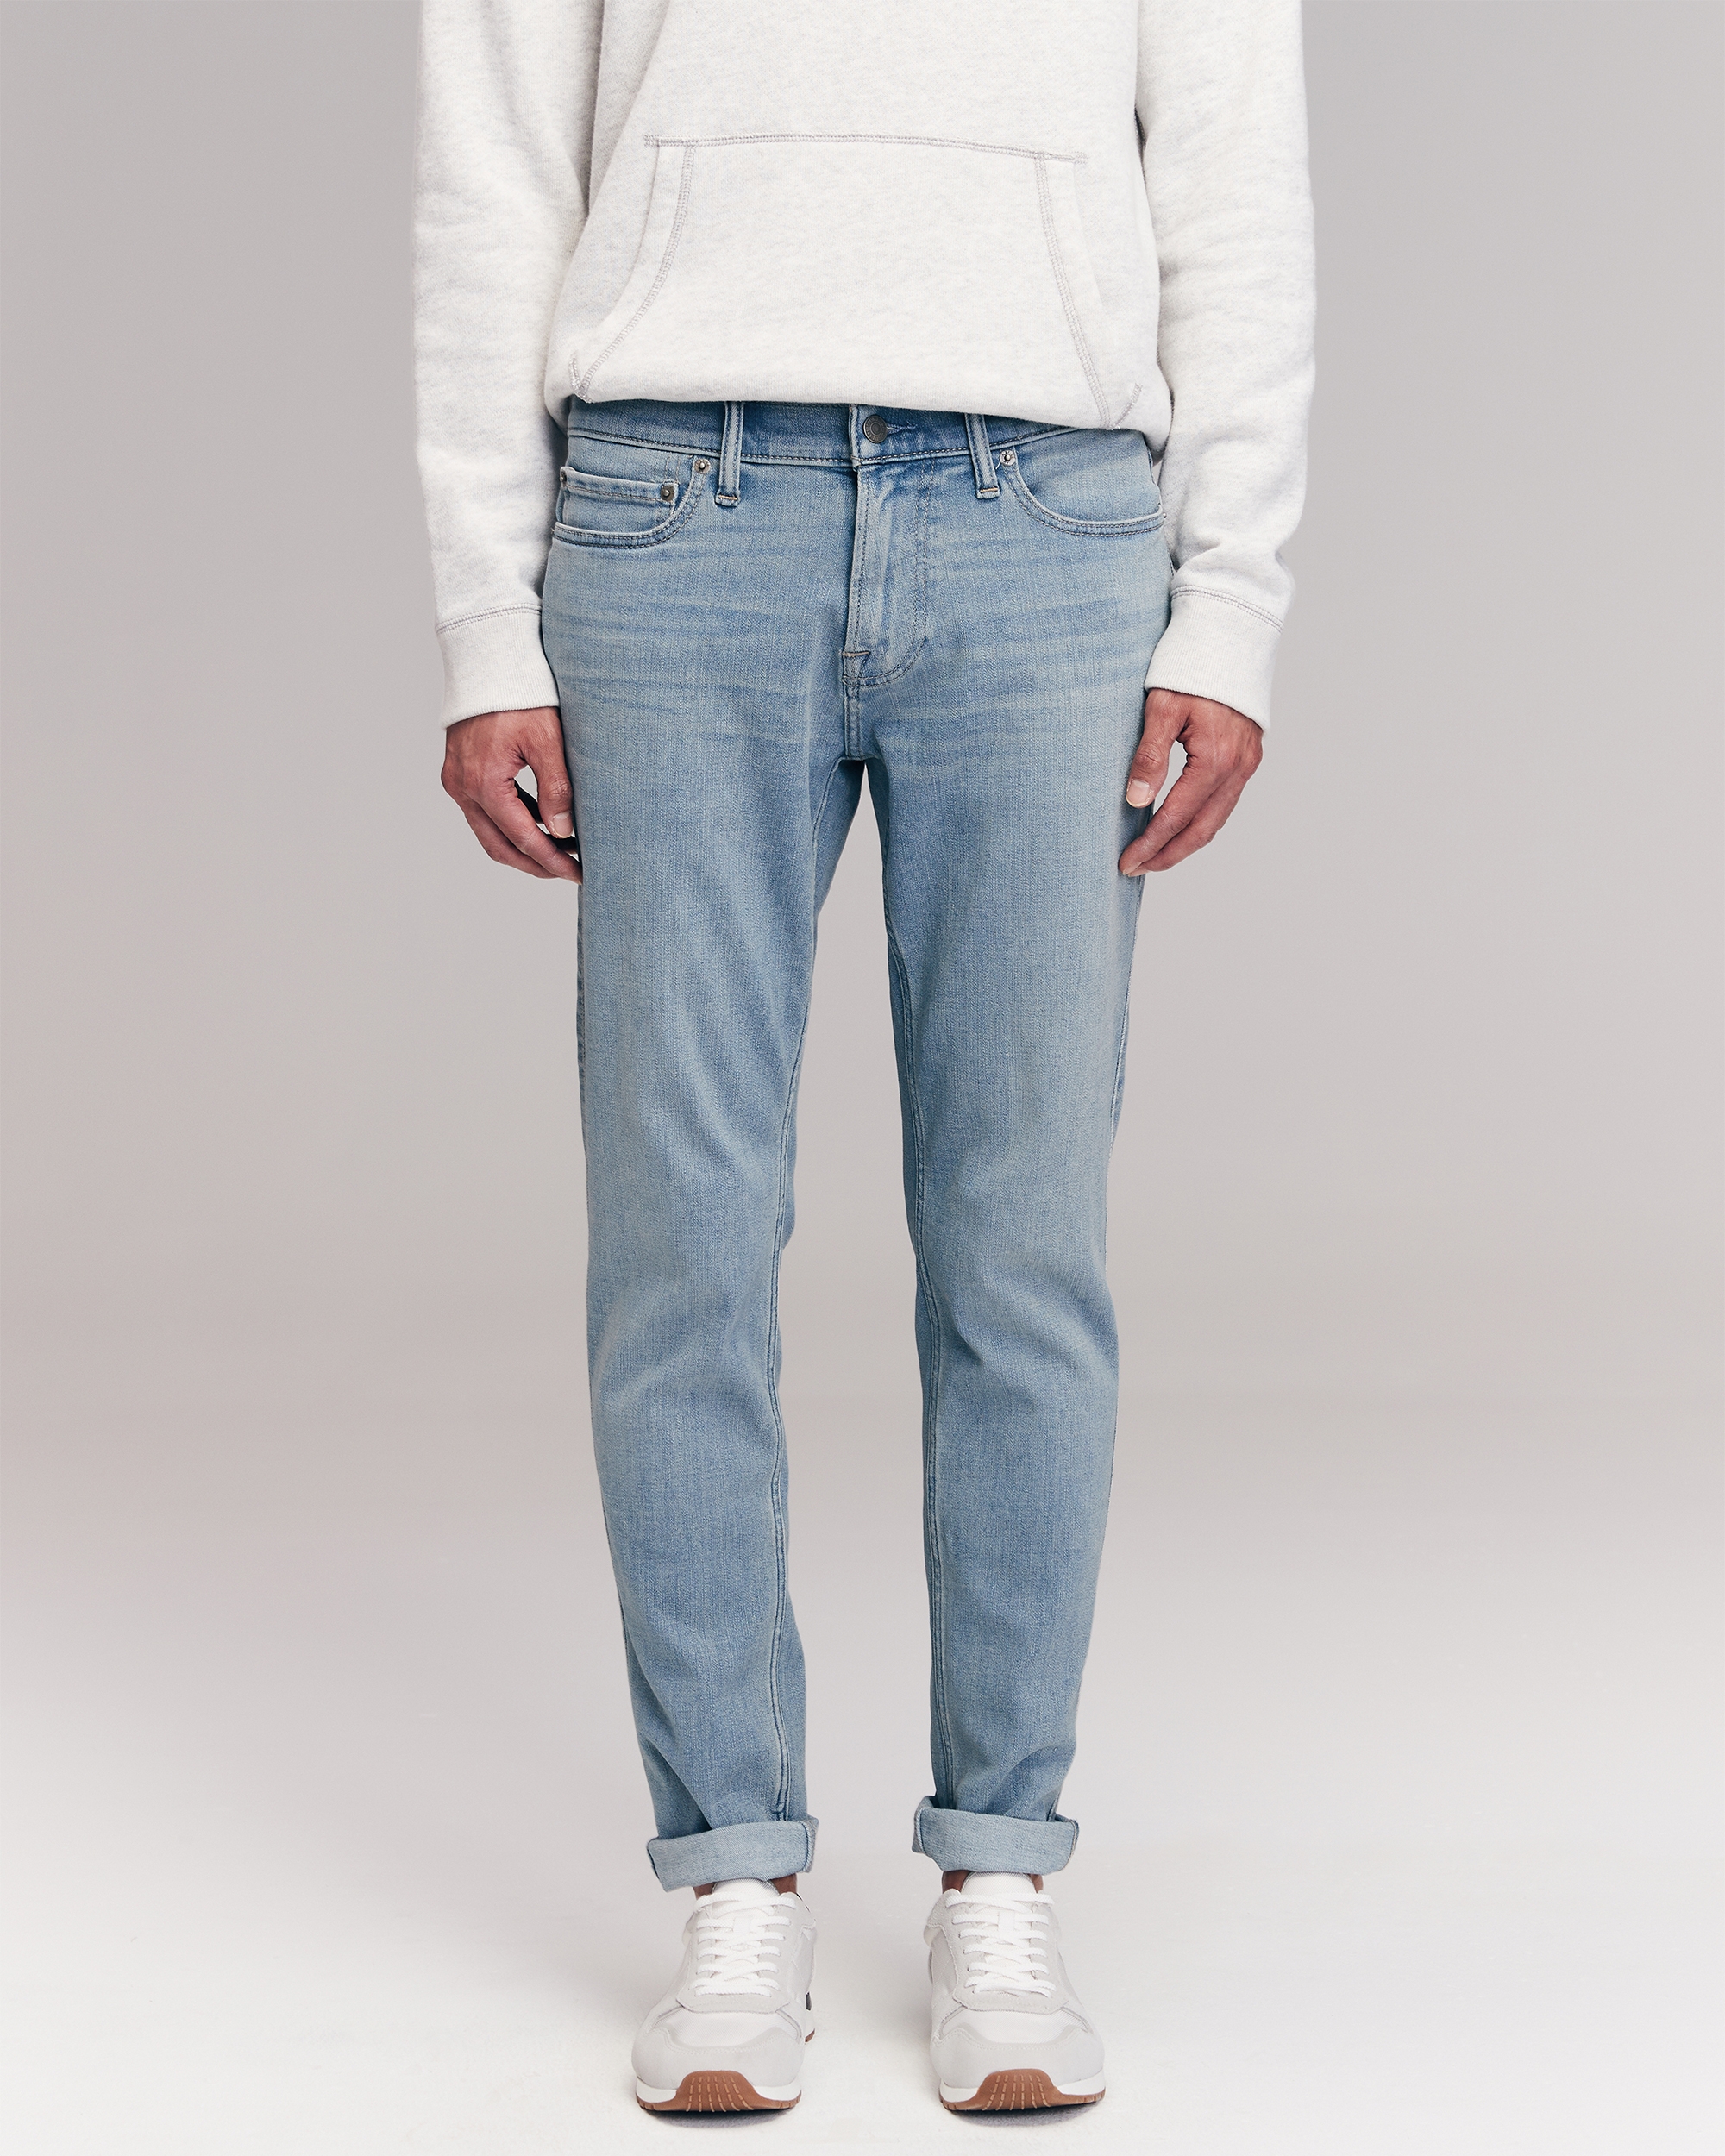 abercrombie athletic skinny jeans